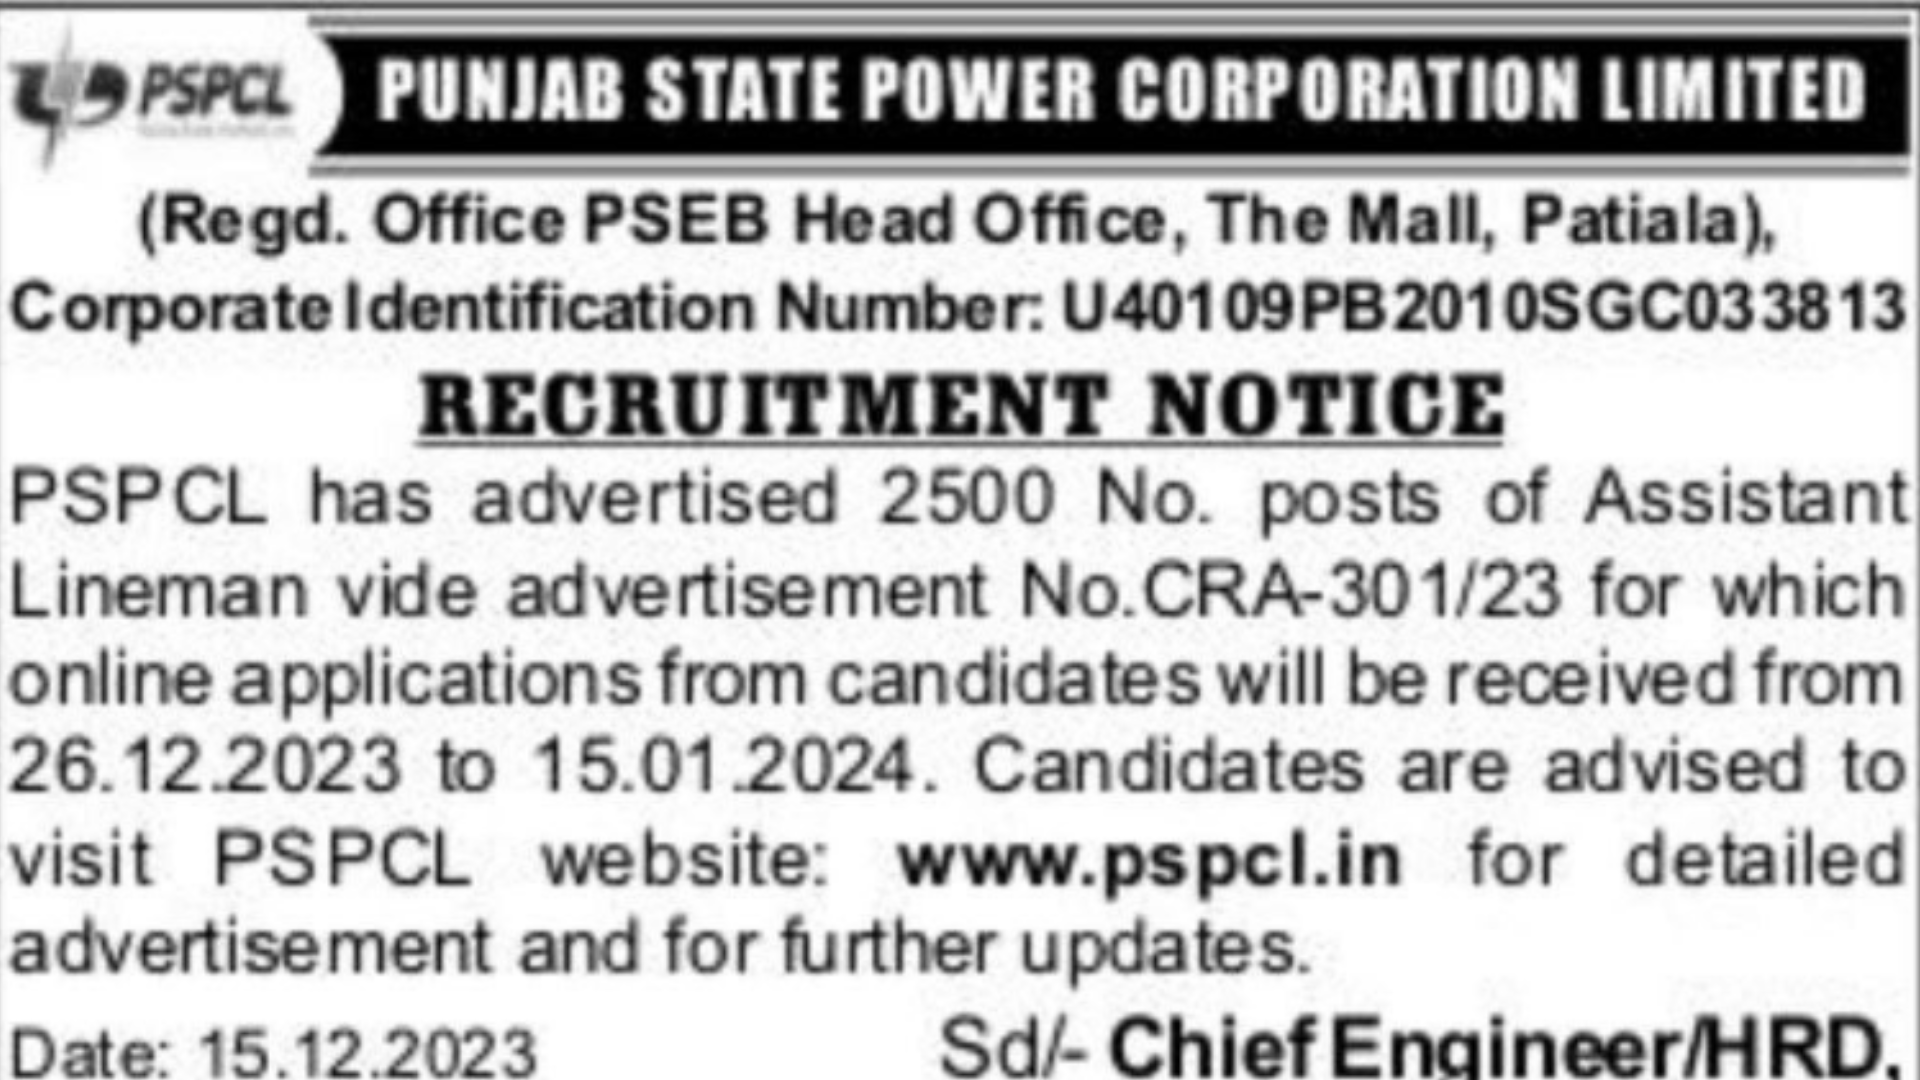 PSPCL ALM Recruitment 2023 [2500 Post] Notification and Online Application Form